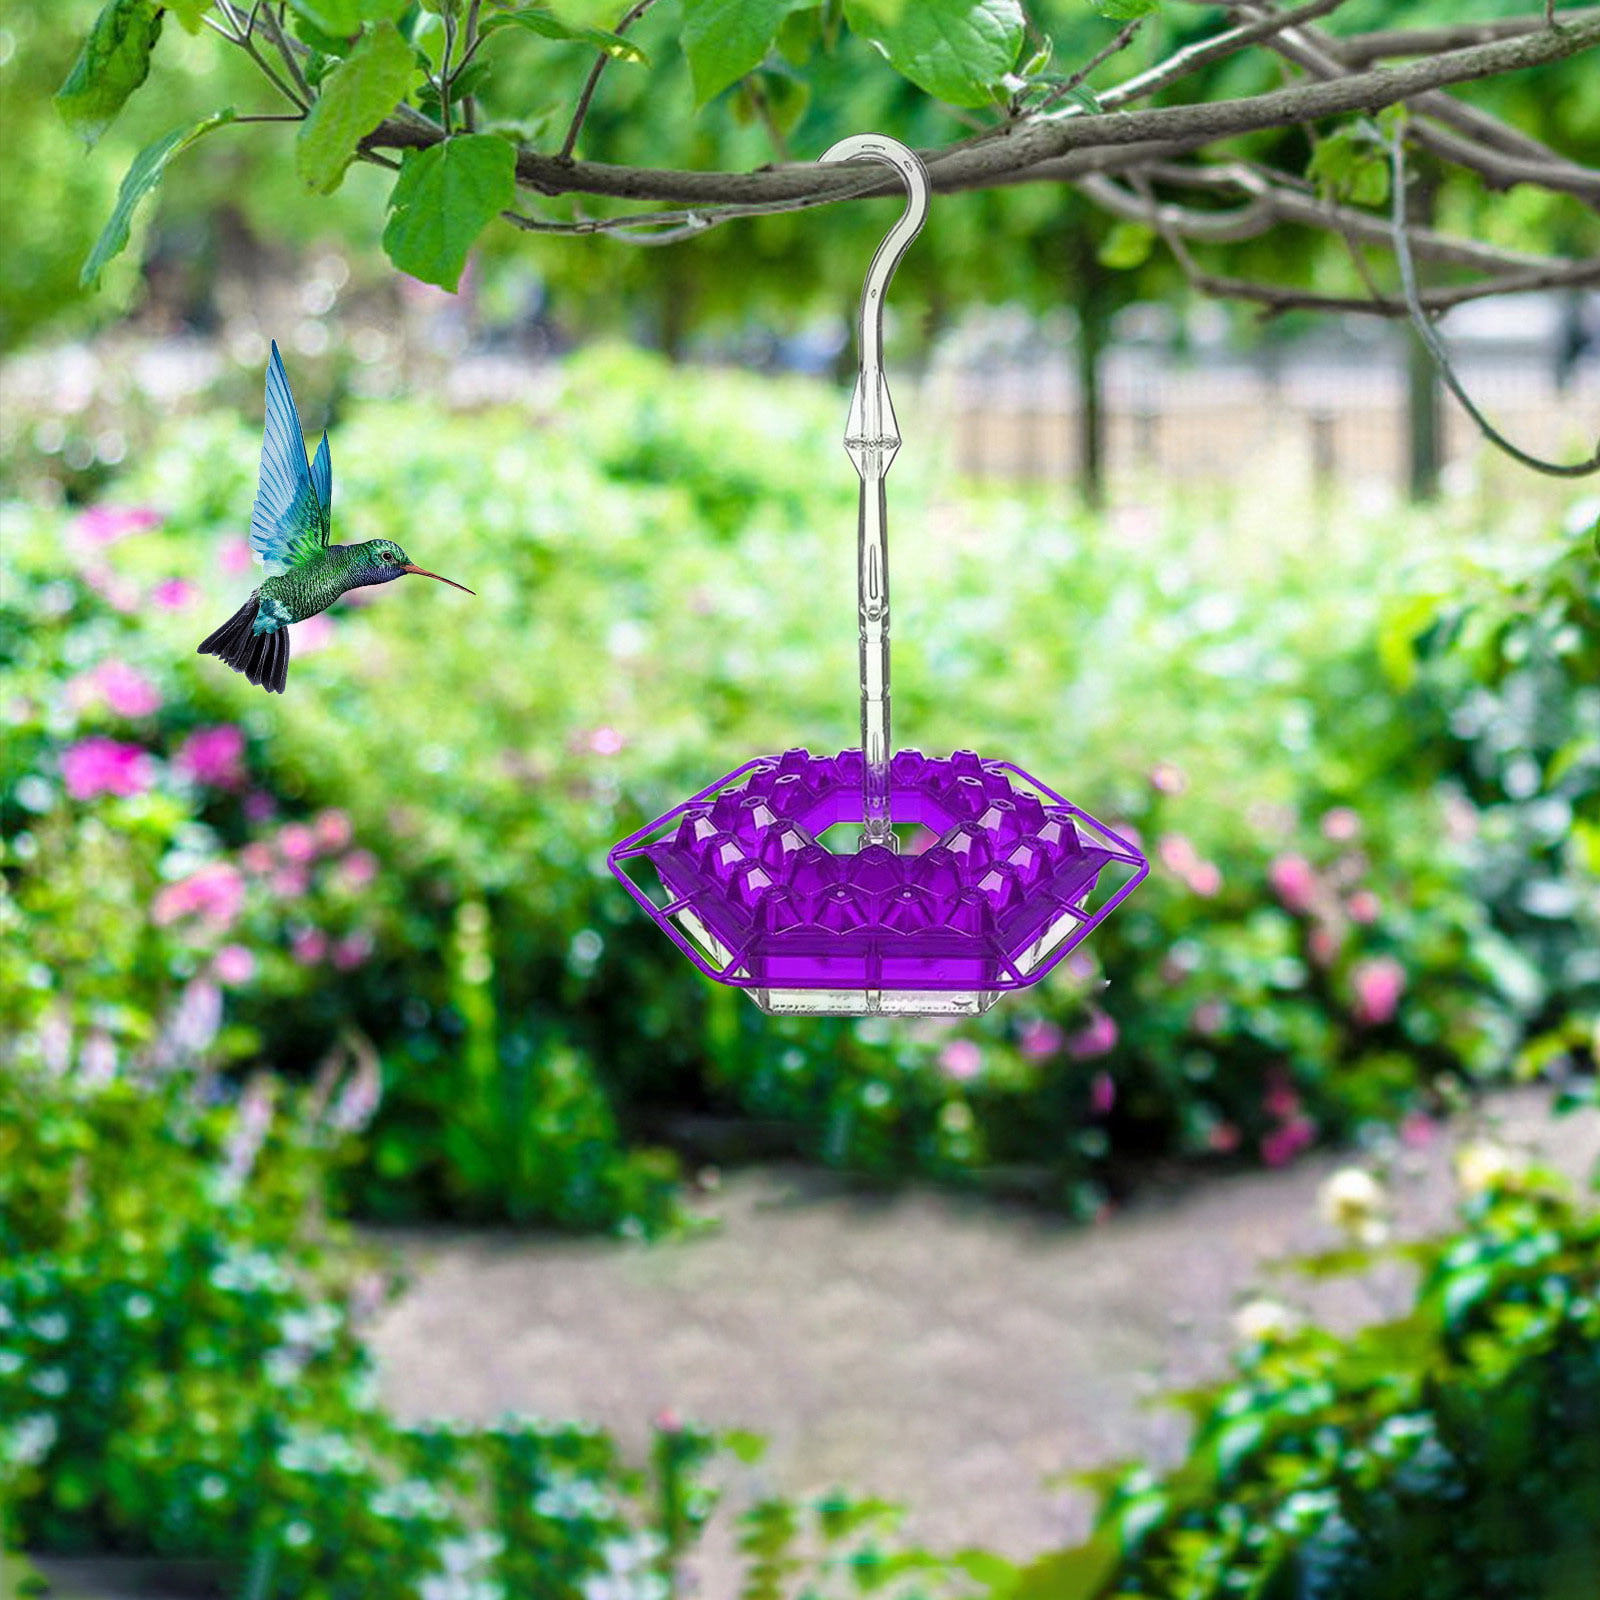 for Outdoor Hanging Yard Garden Decoration Easy to Fill and Clean Best Hummingbird Feeders 2PC Red with 30 Feeding Ports Unique Perch and Built-in Moat 2PC Mary's Sweety Hummingbird Feeder 